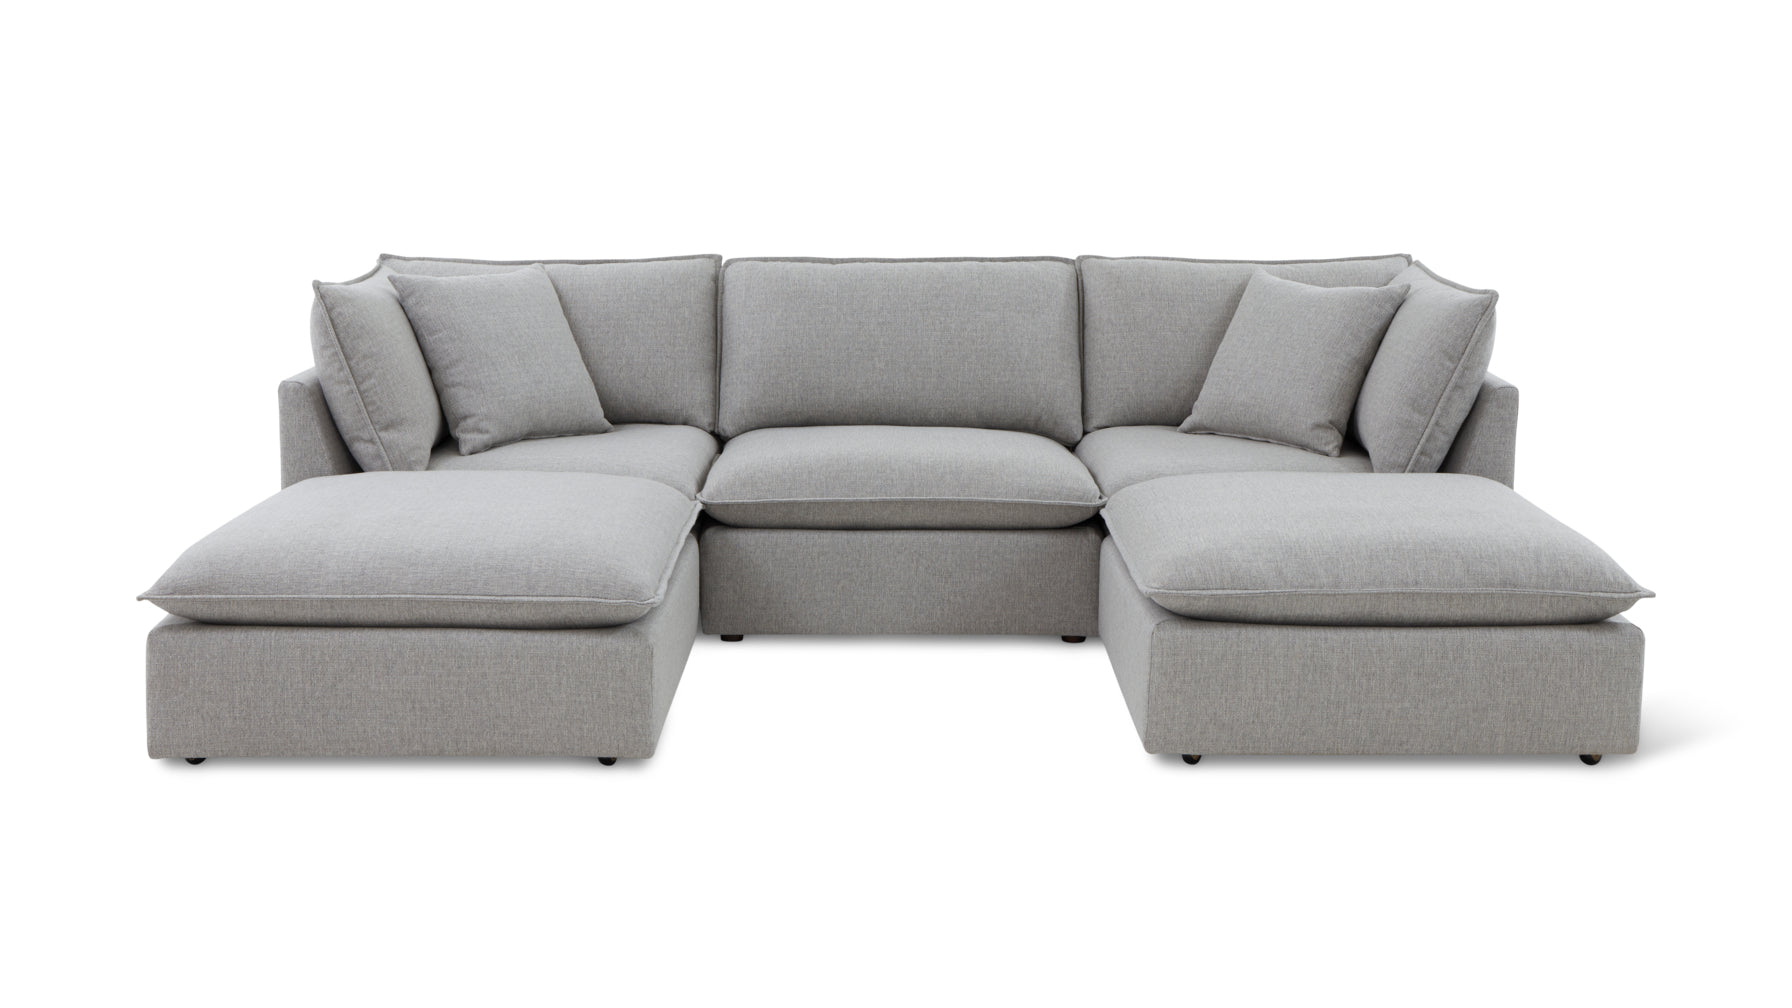 Chill Time 5-Piece Modular U-Shaped Sectional, Heather - Image 1